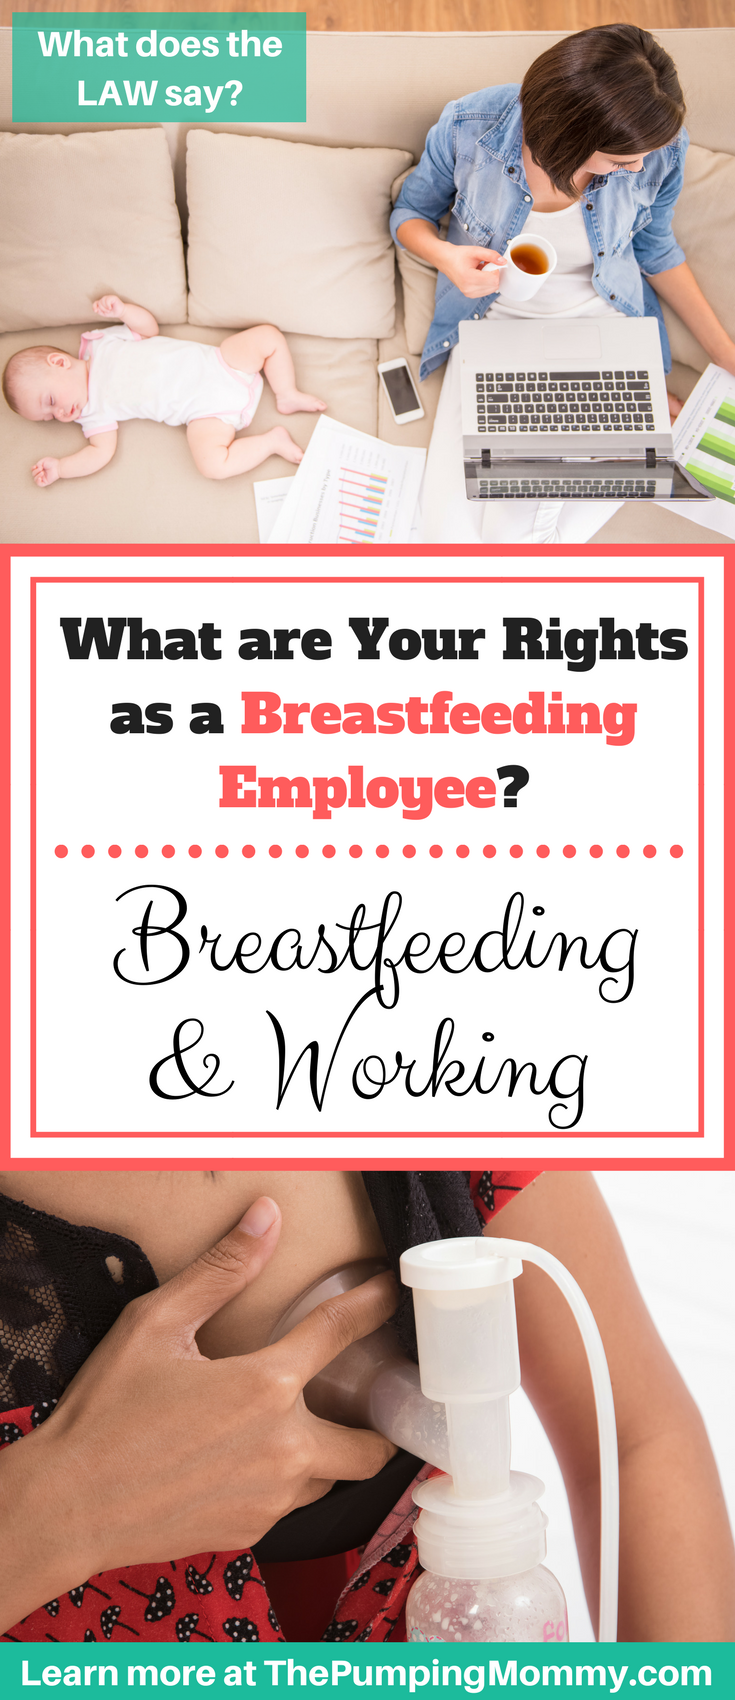 Rights as a Breastfeeding Employee